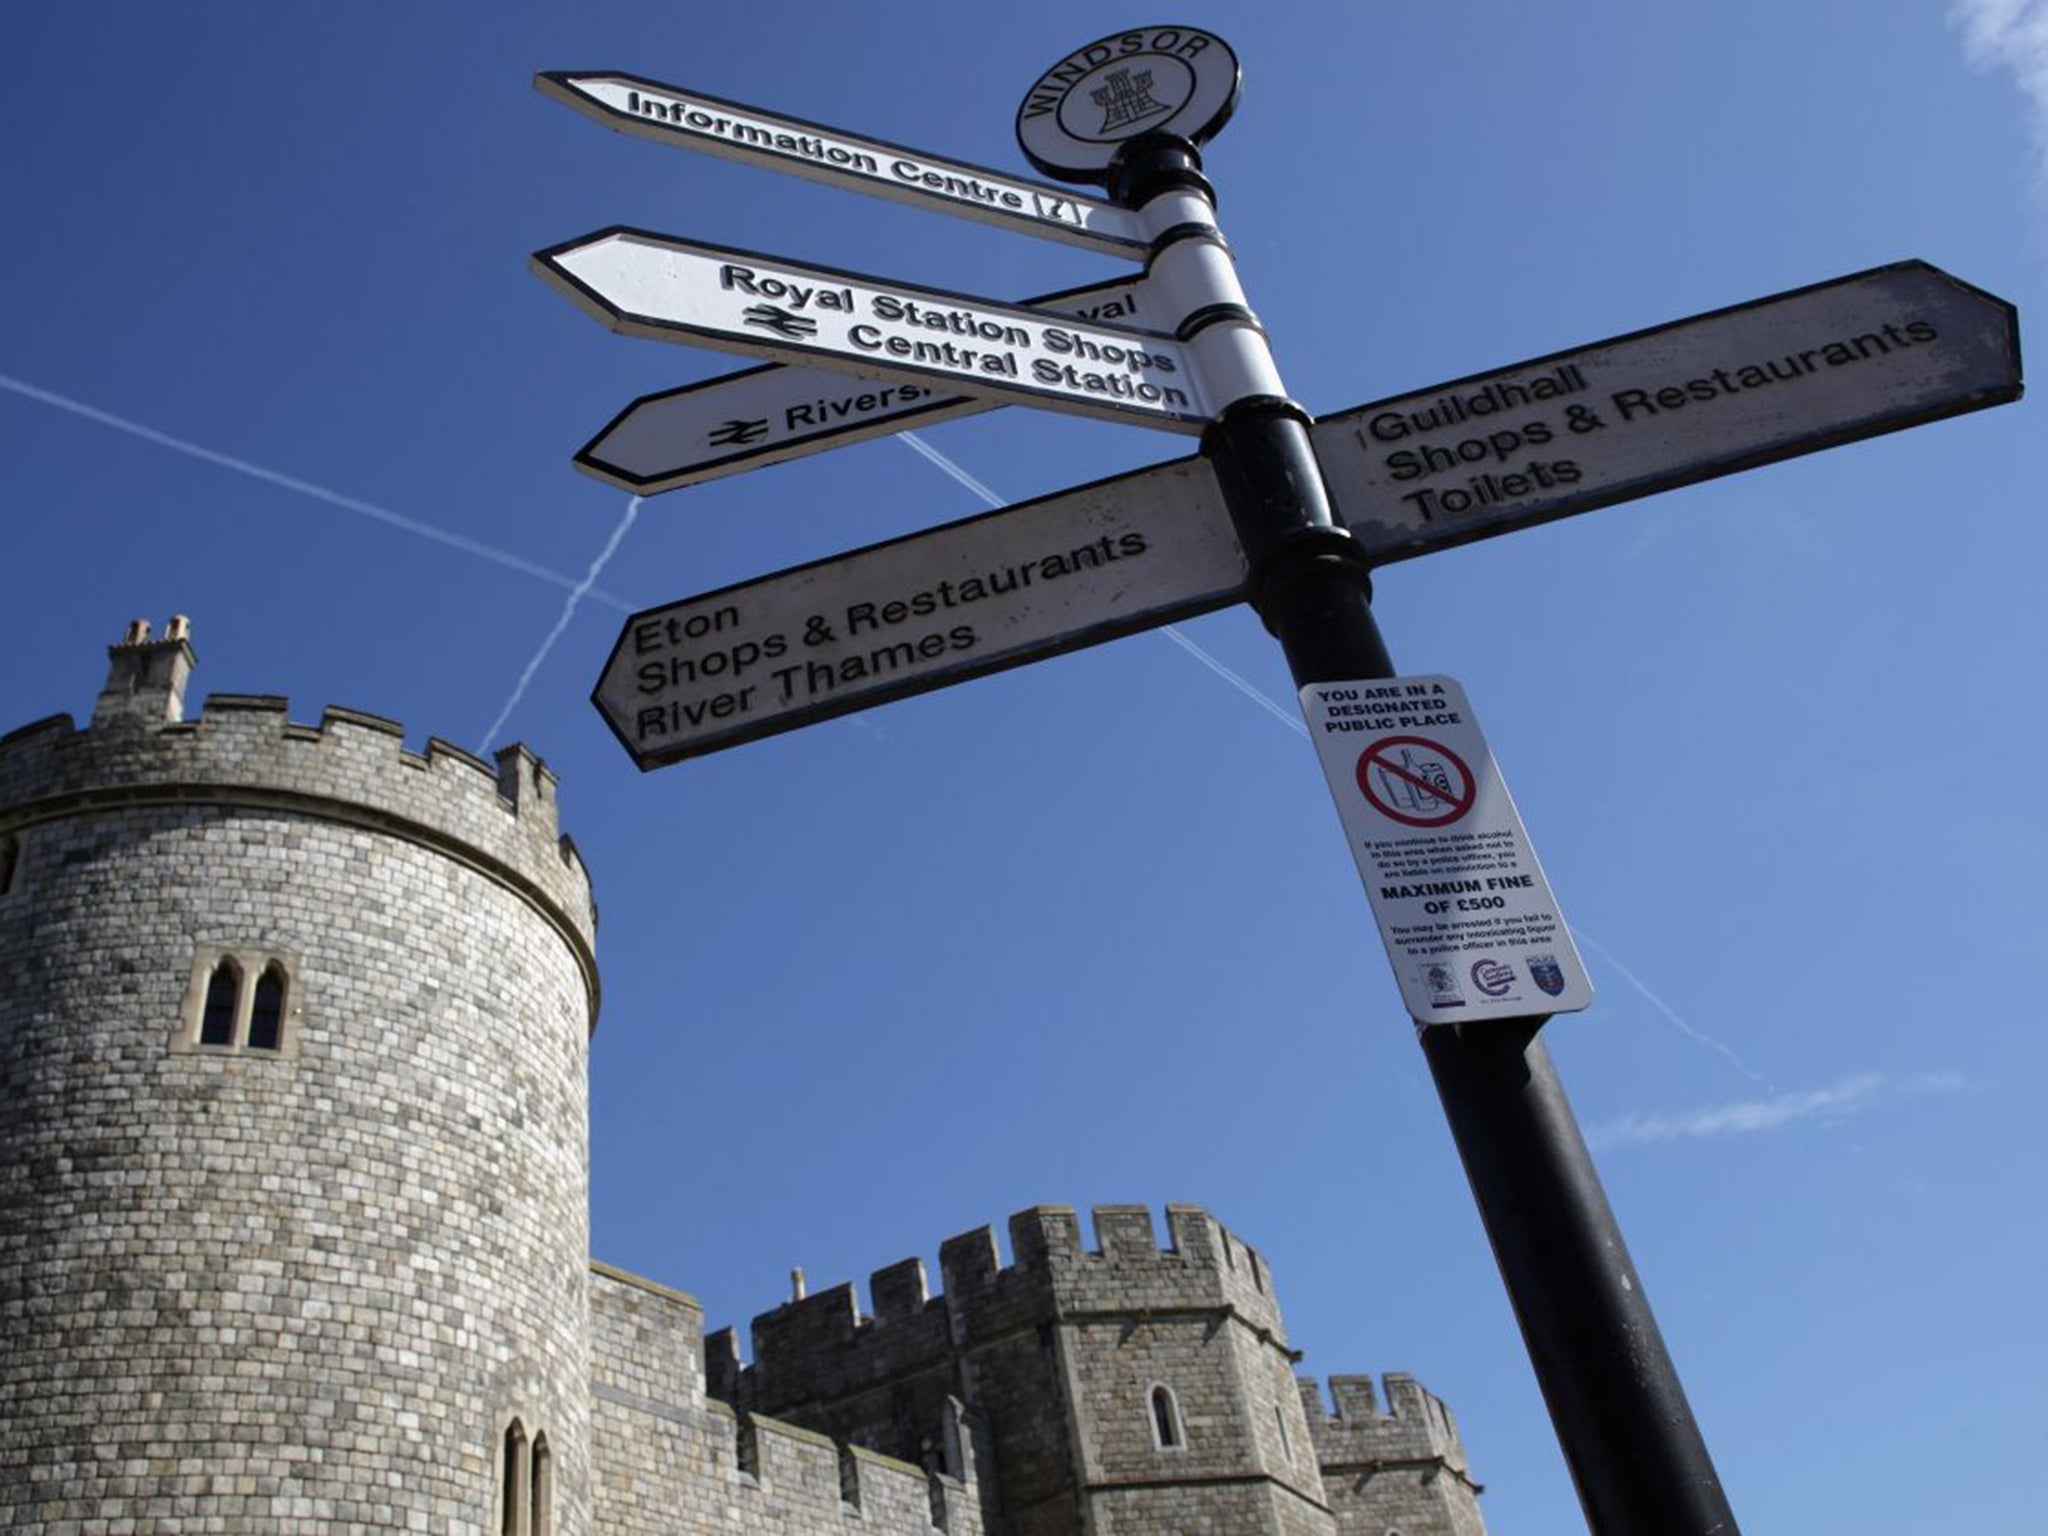 Wardens at Windsor Castle say they have shown goodwill over pay in recent years